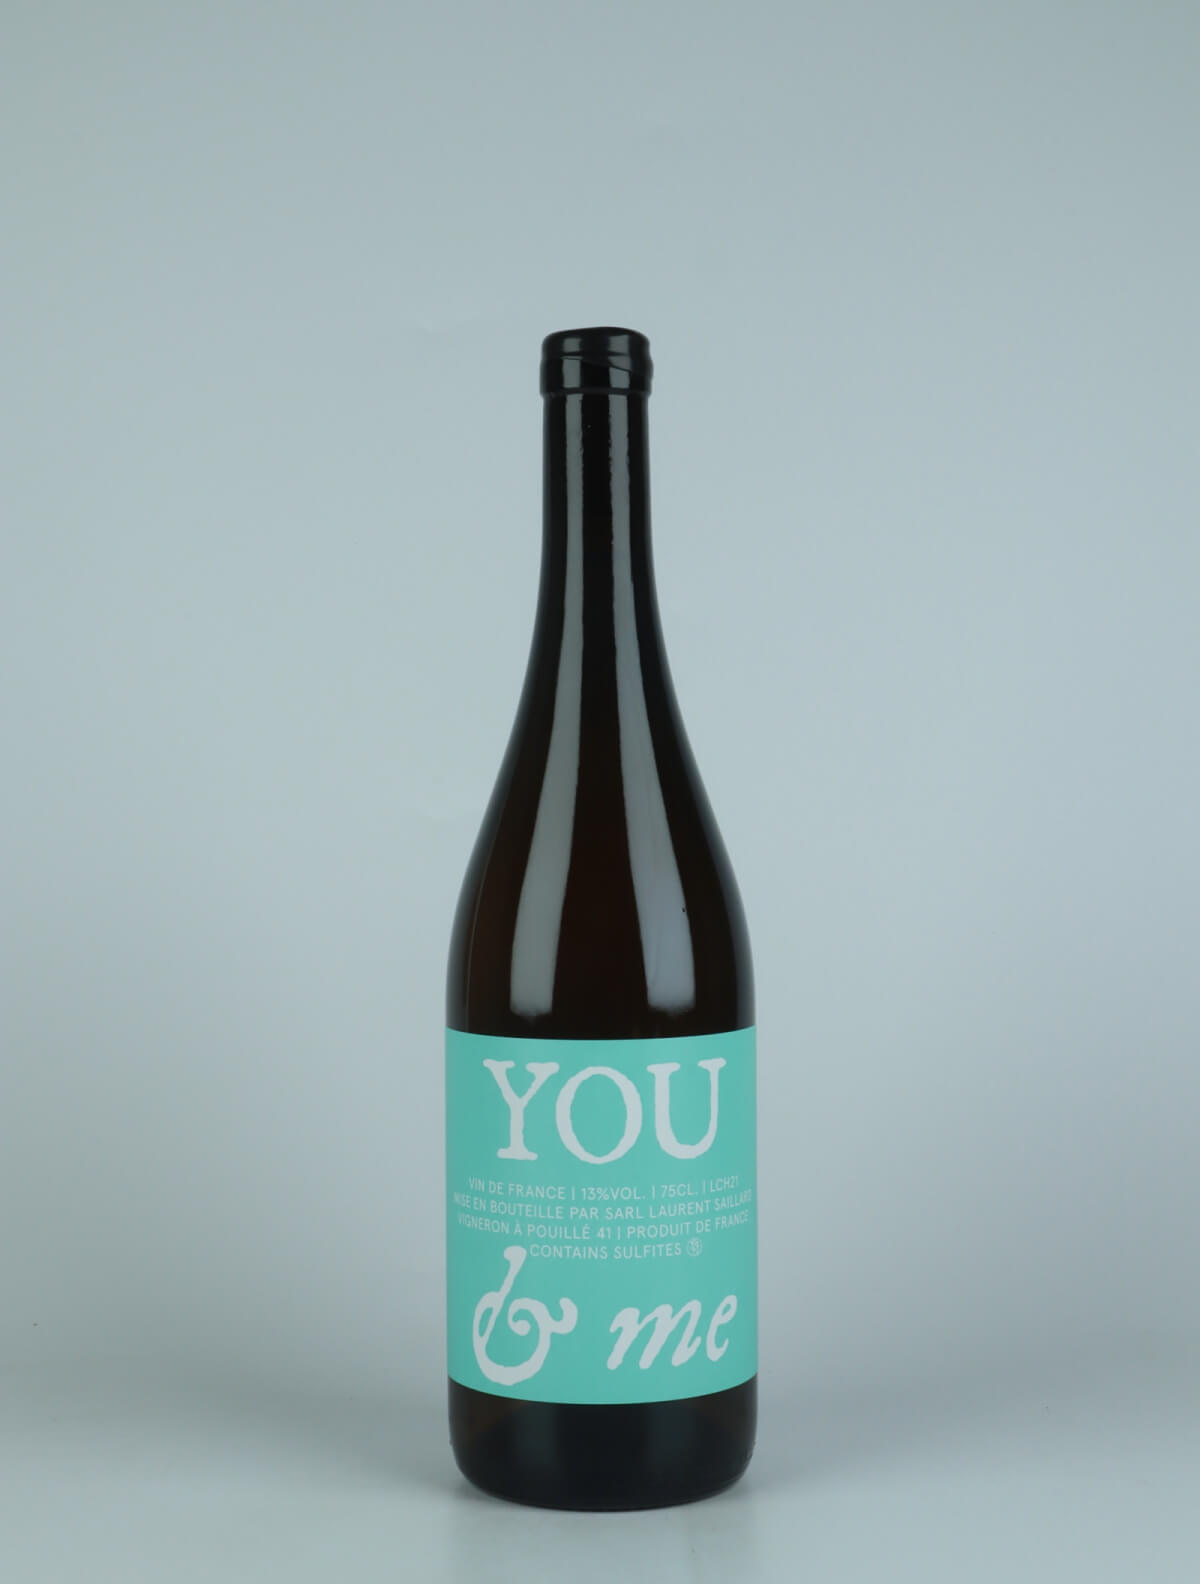 A bottle 2022 You & Me White wine from Laurent Saillard, Loire in France